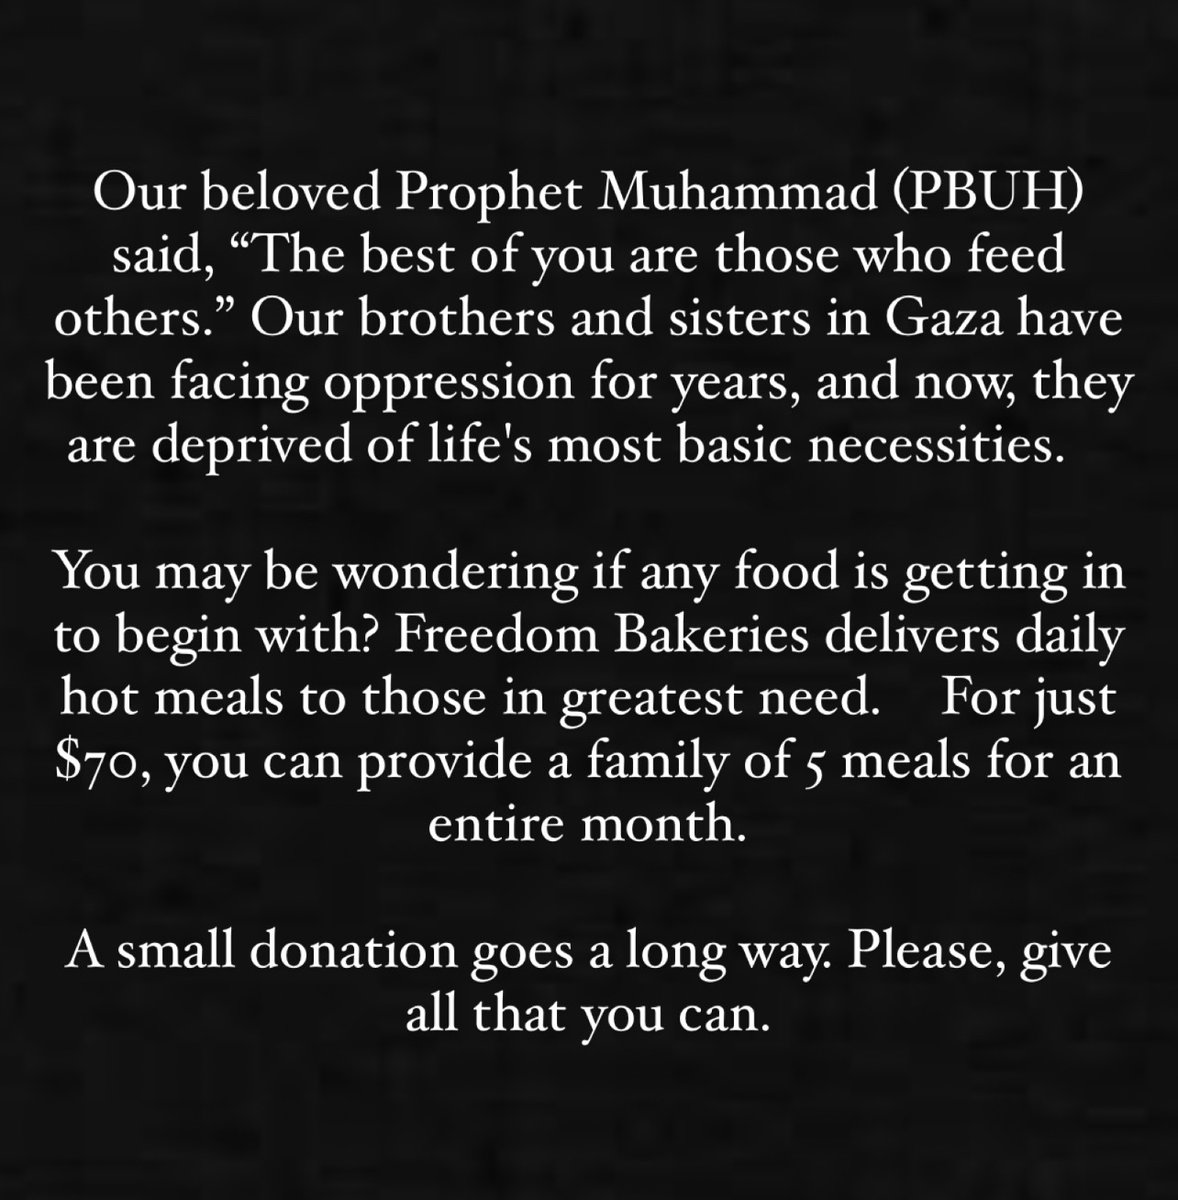 A small donation goes a long way. Please, give all that you can. launchgood.com/FeedGaza2024